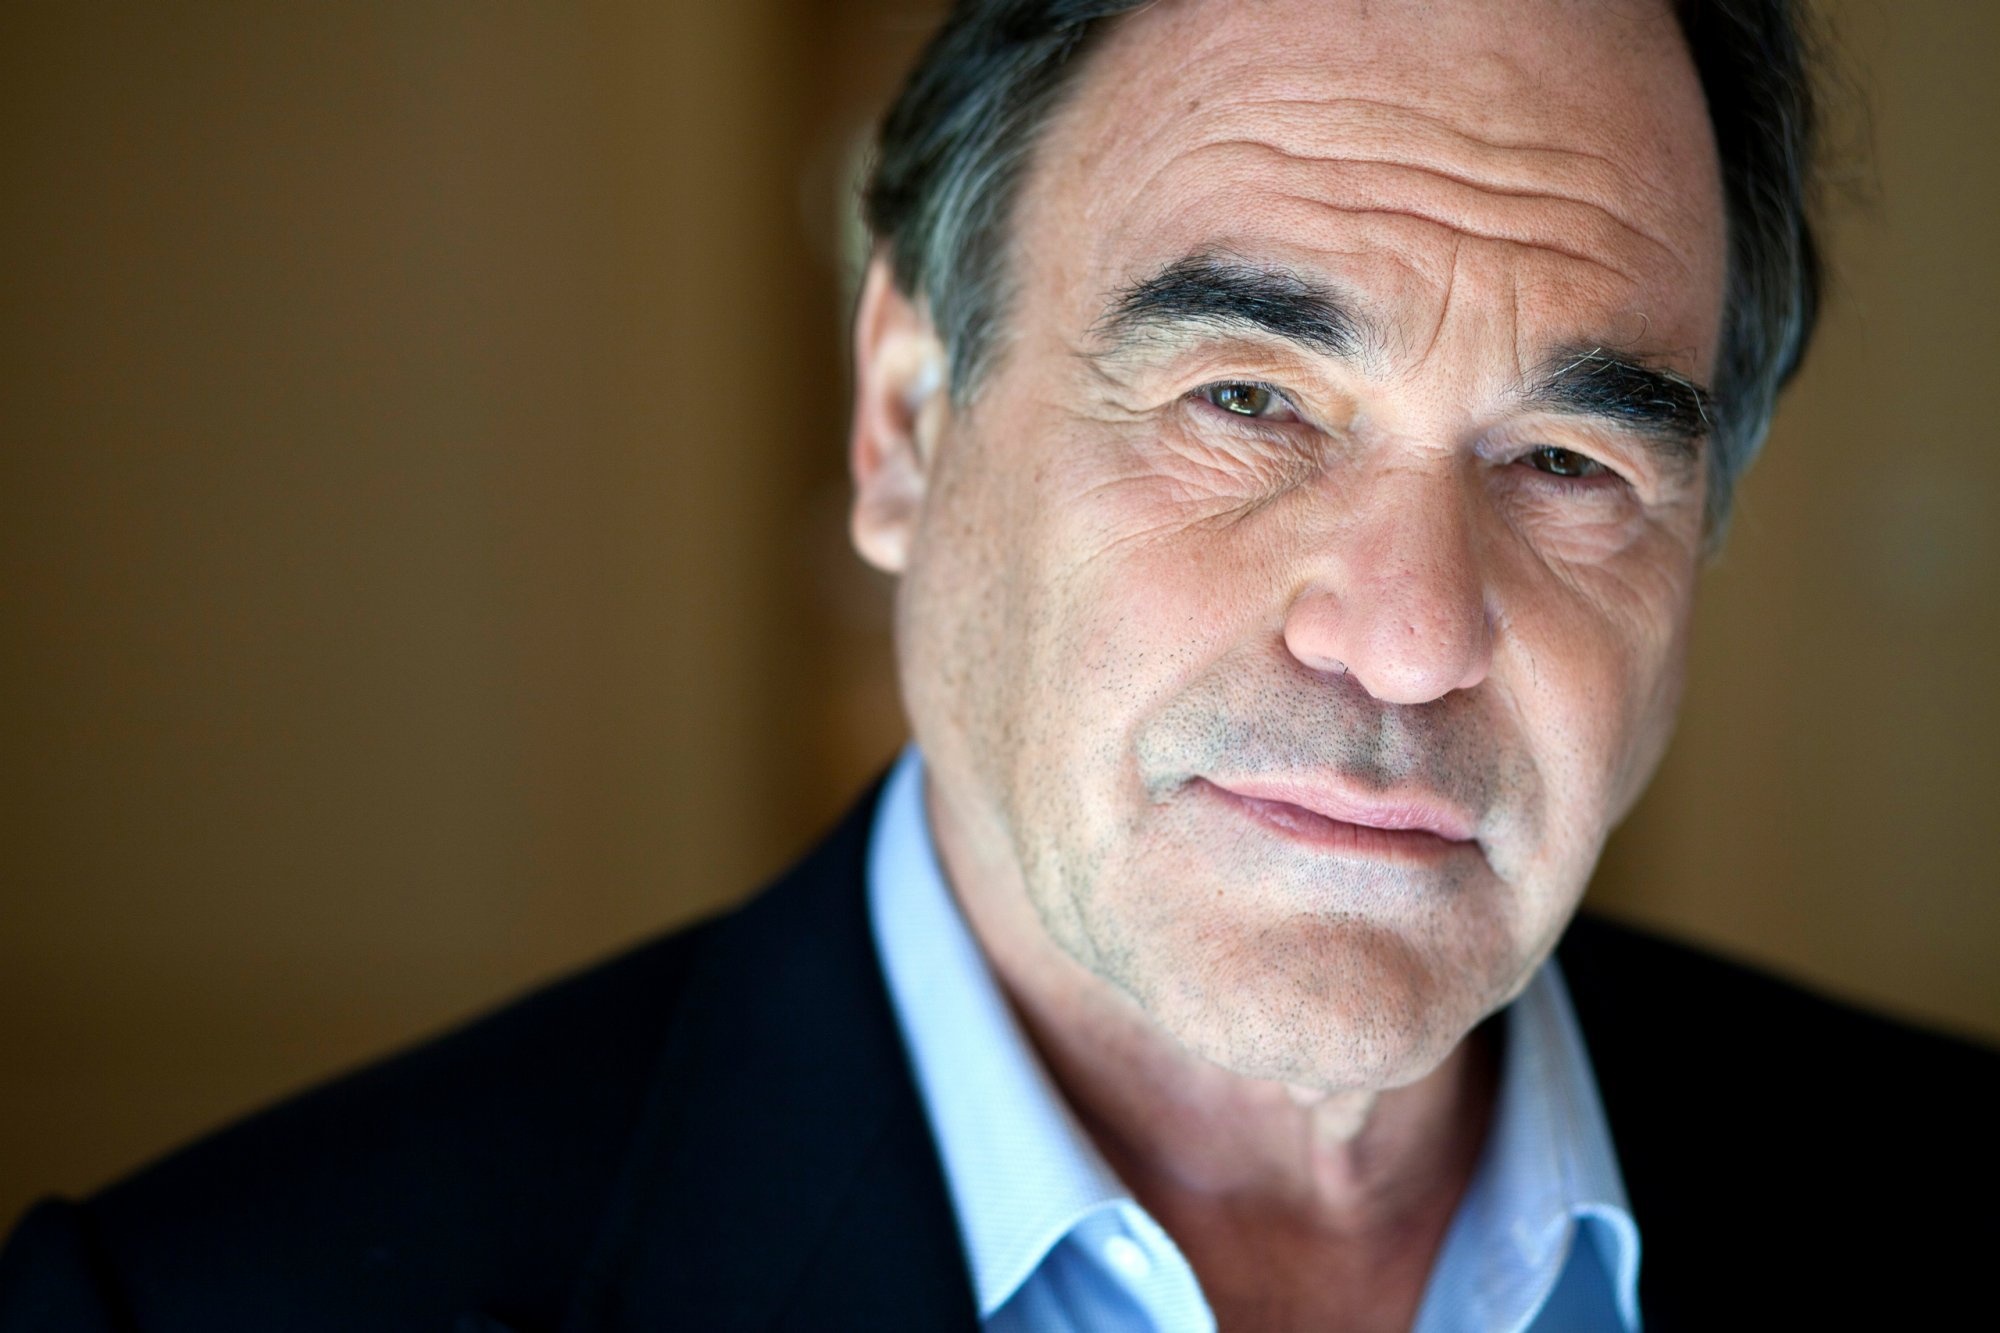 Oliver Stone, Veterans advocacy, Supporting heroes, Military service, 2000x1340 HD Desktop